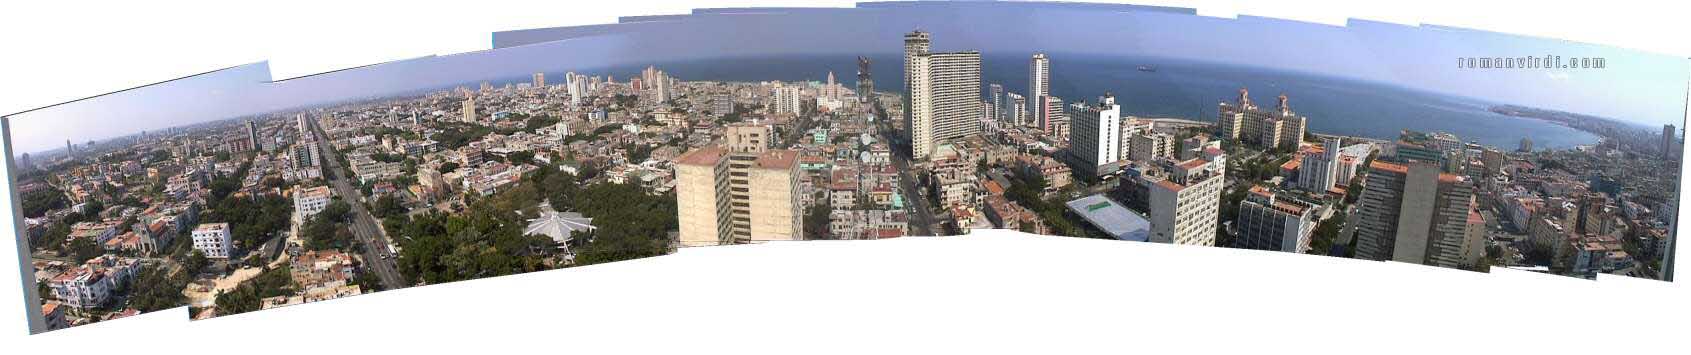 Extreme Panorama View from Che & Fidel's Suite's Balconies at Hotel Havana Libre. The spike on the extreme left is the Jose Marti Memorial. The flat, ribbed, metal pancake is the Coppelia Icecream Parlour. Havana Vieja is to the extreme right